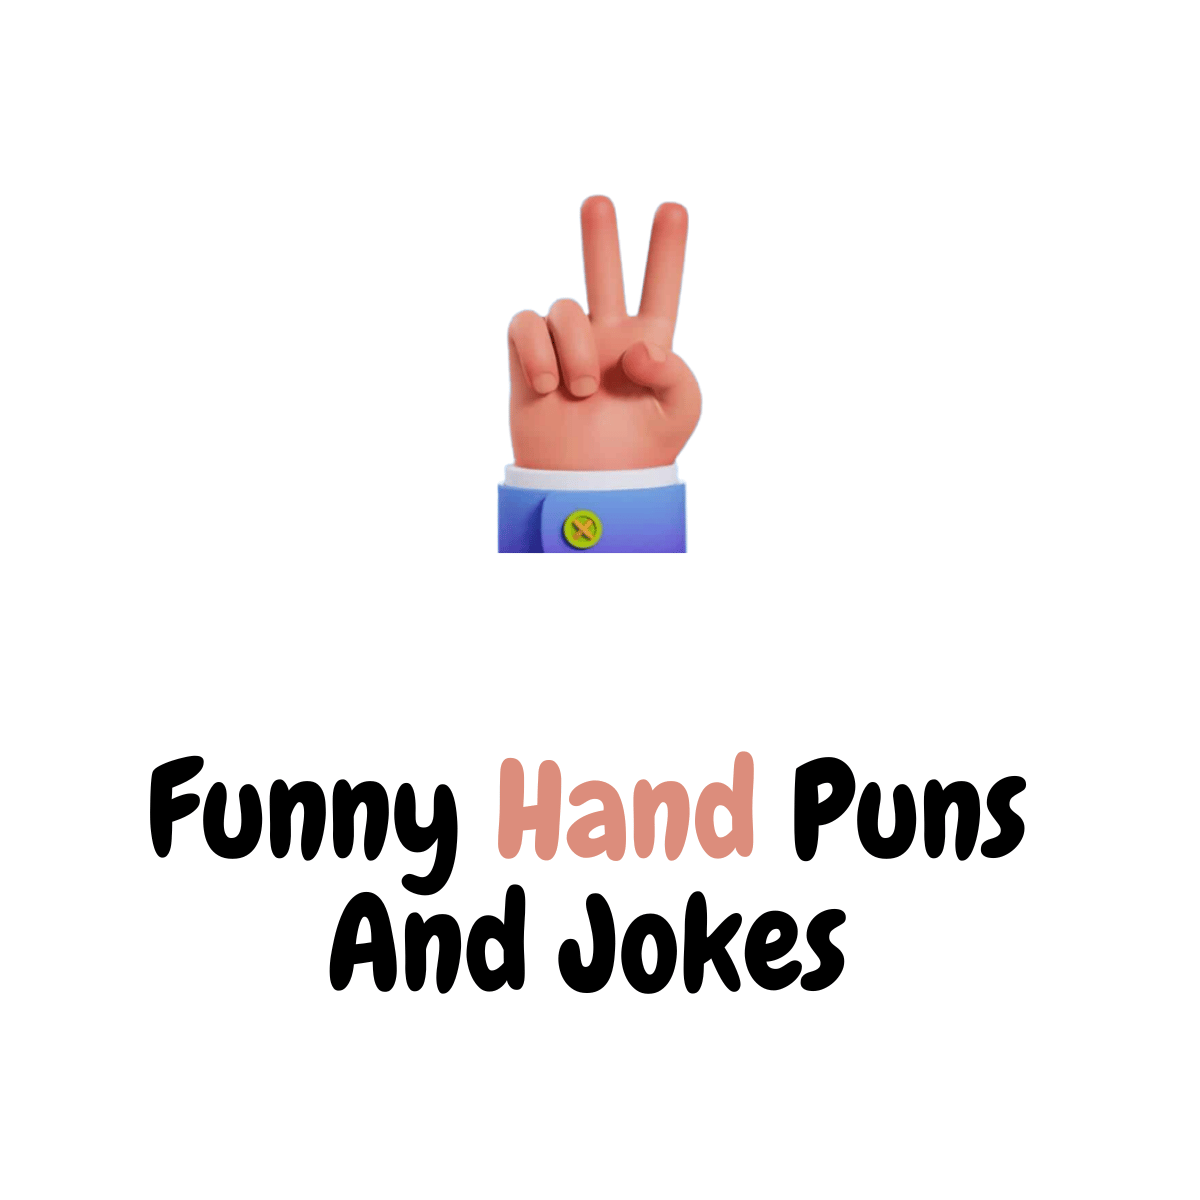 120+ Funny Hand Puns And Jokes: High-Five Humor - Funniest Puns